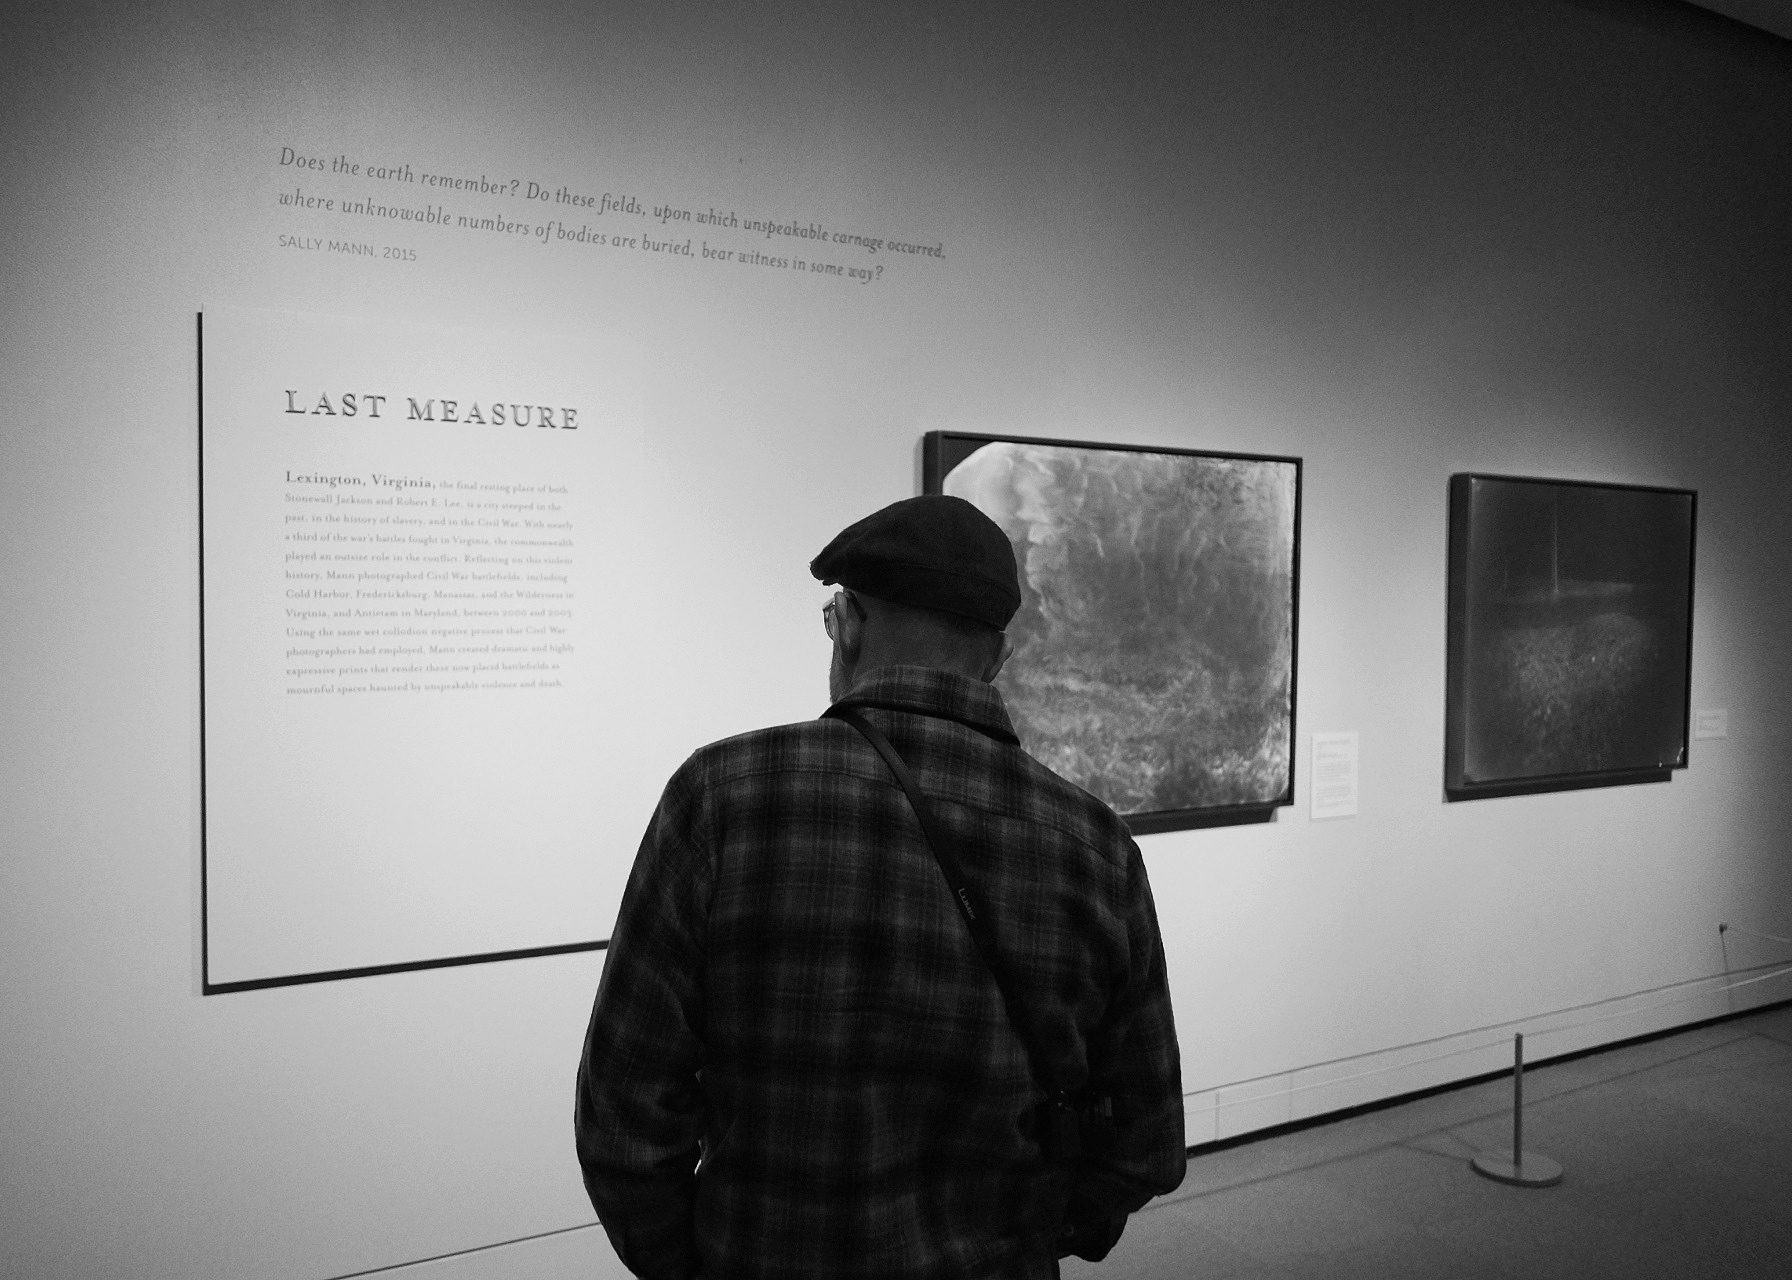 Last Measure: Does the earth remember? Do these fields, upon which unspeakable carnage occurred, where unknowable numbers of bodies are buried, bear witness in some way? — Sally Mann, 2015